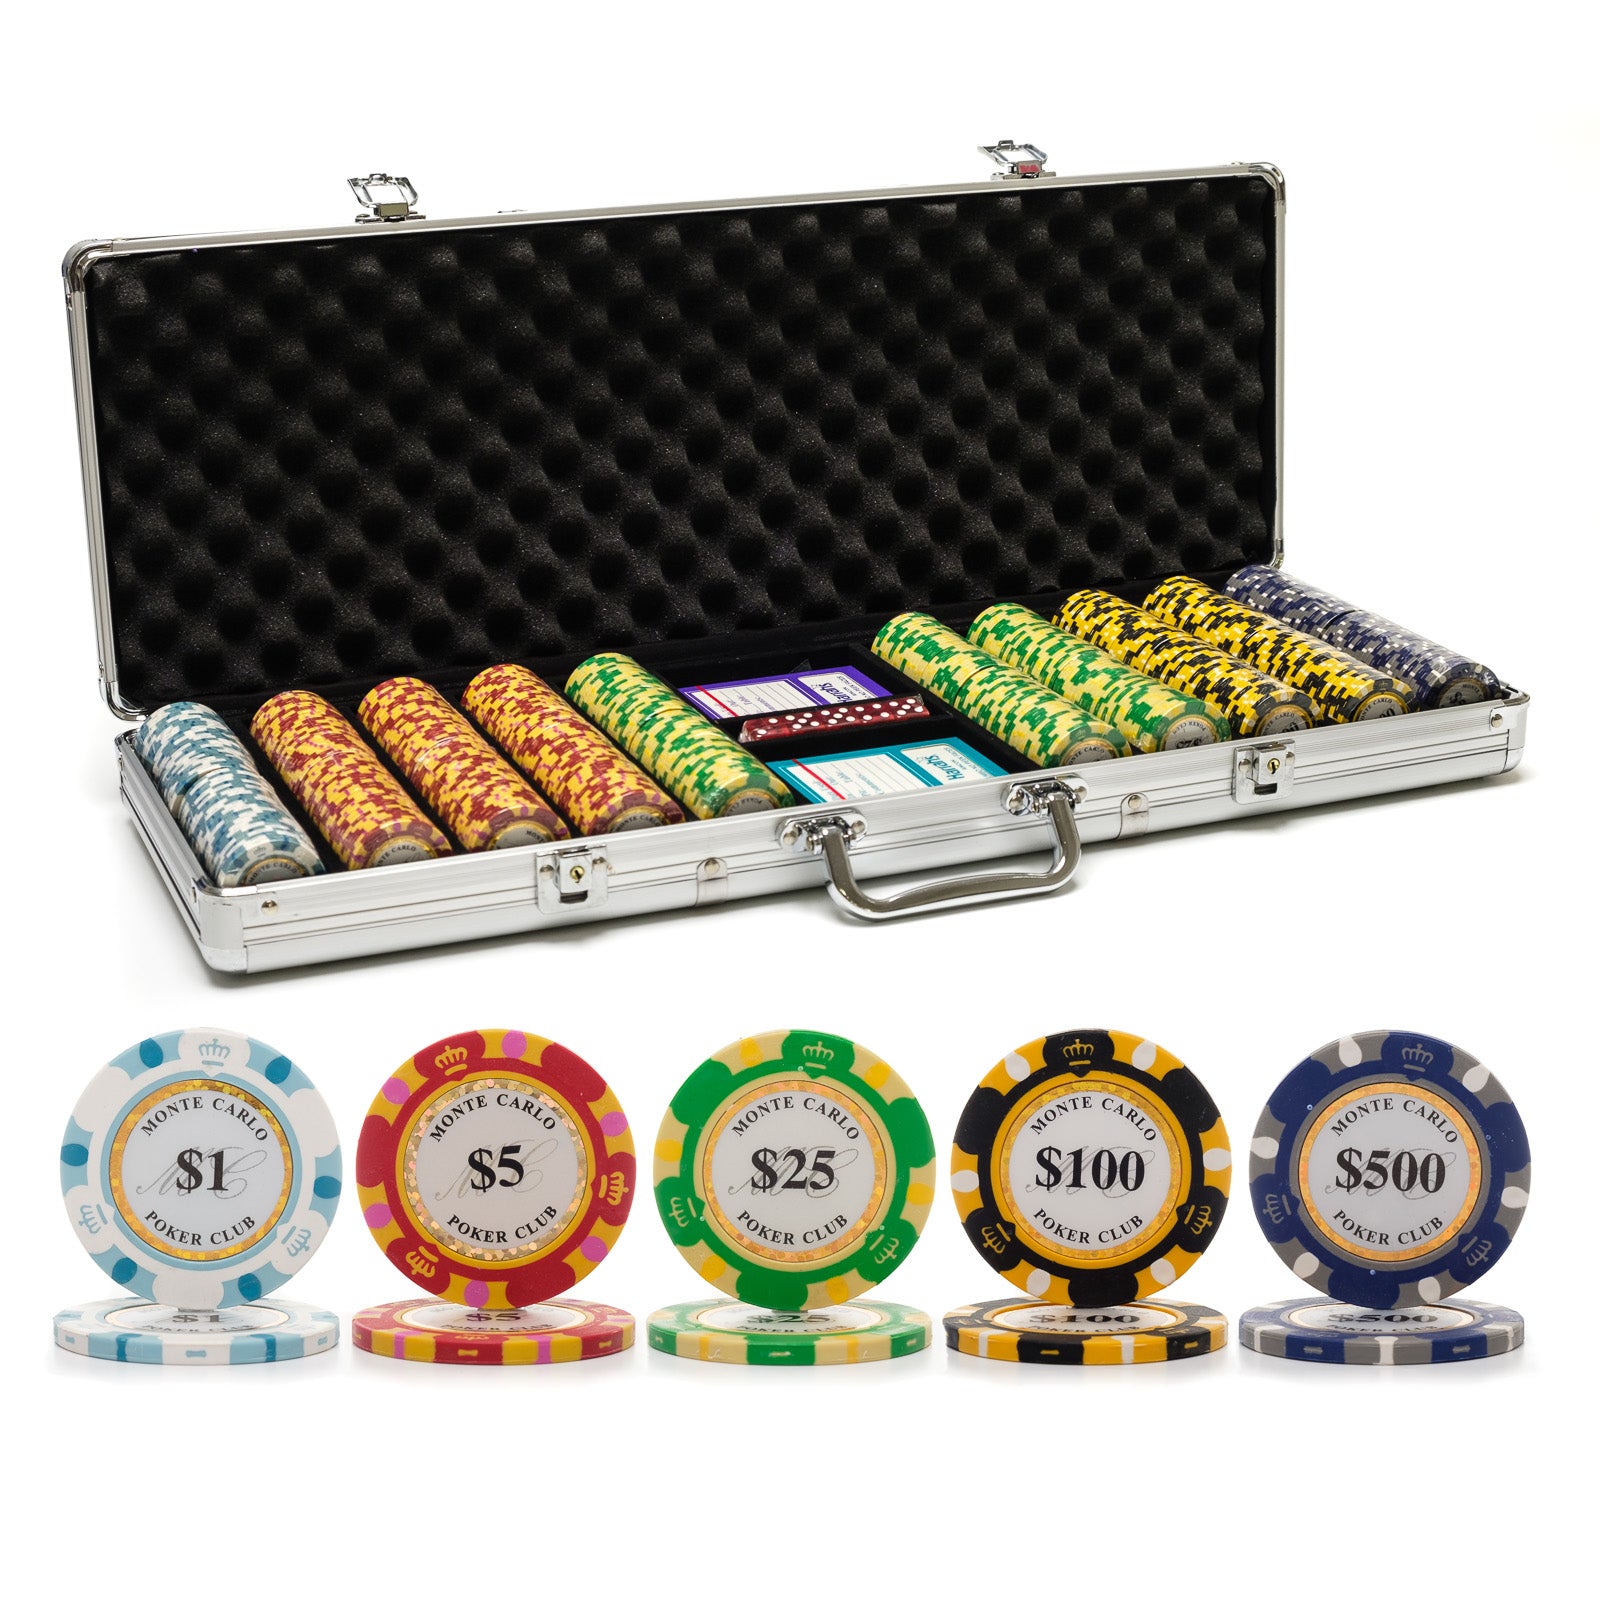 500 pc. 13.5g Monte Carlo Poker Chip Set with Aluminum Case